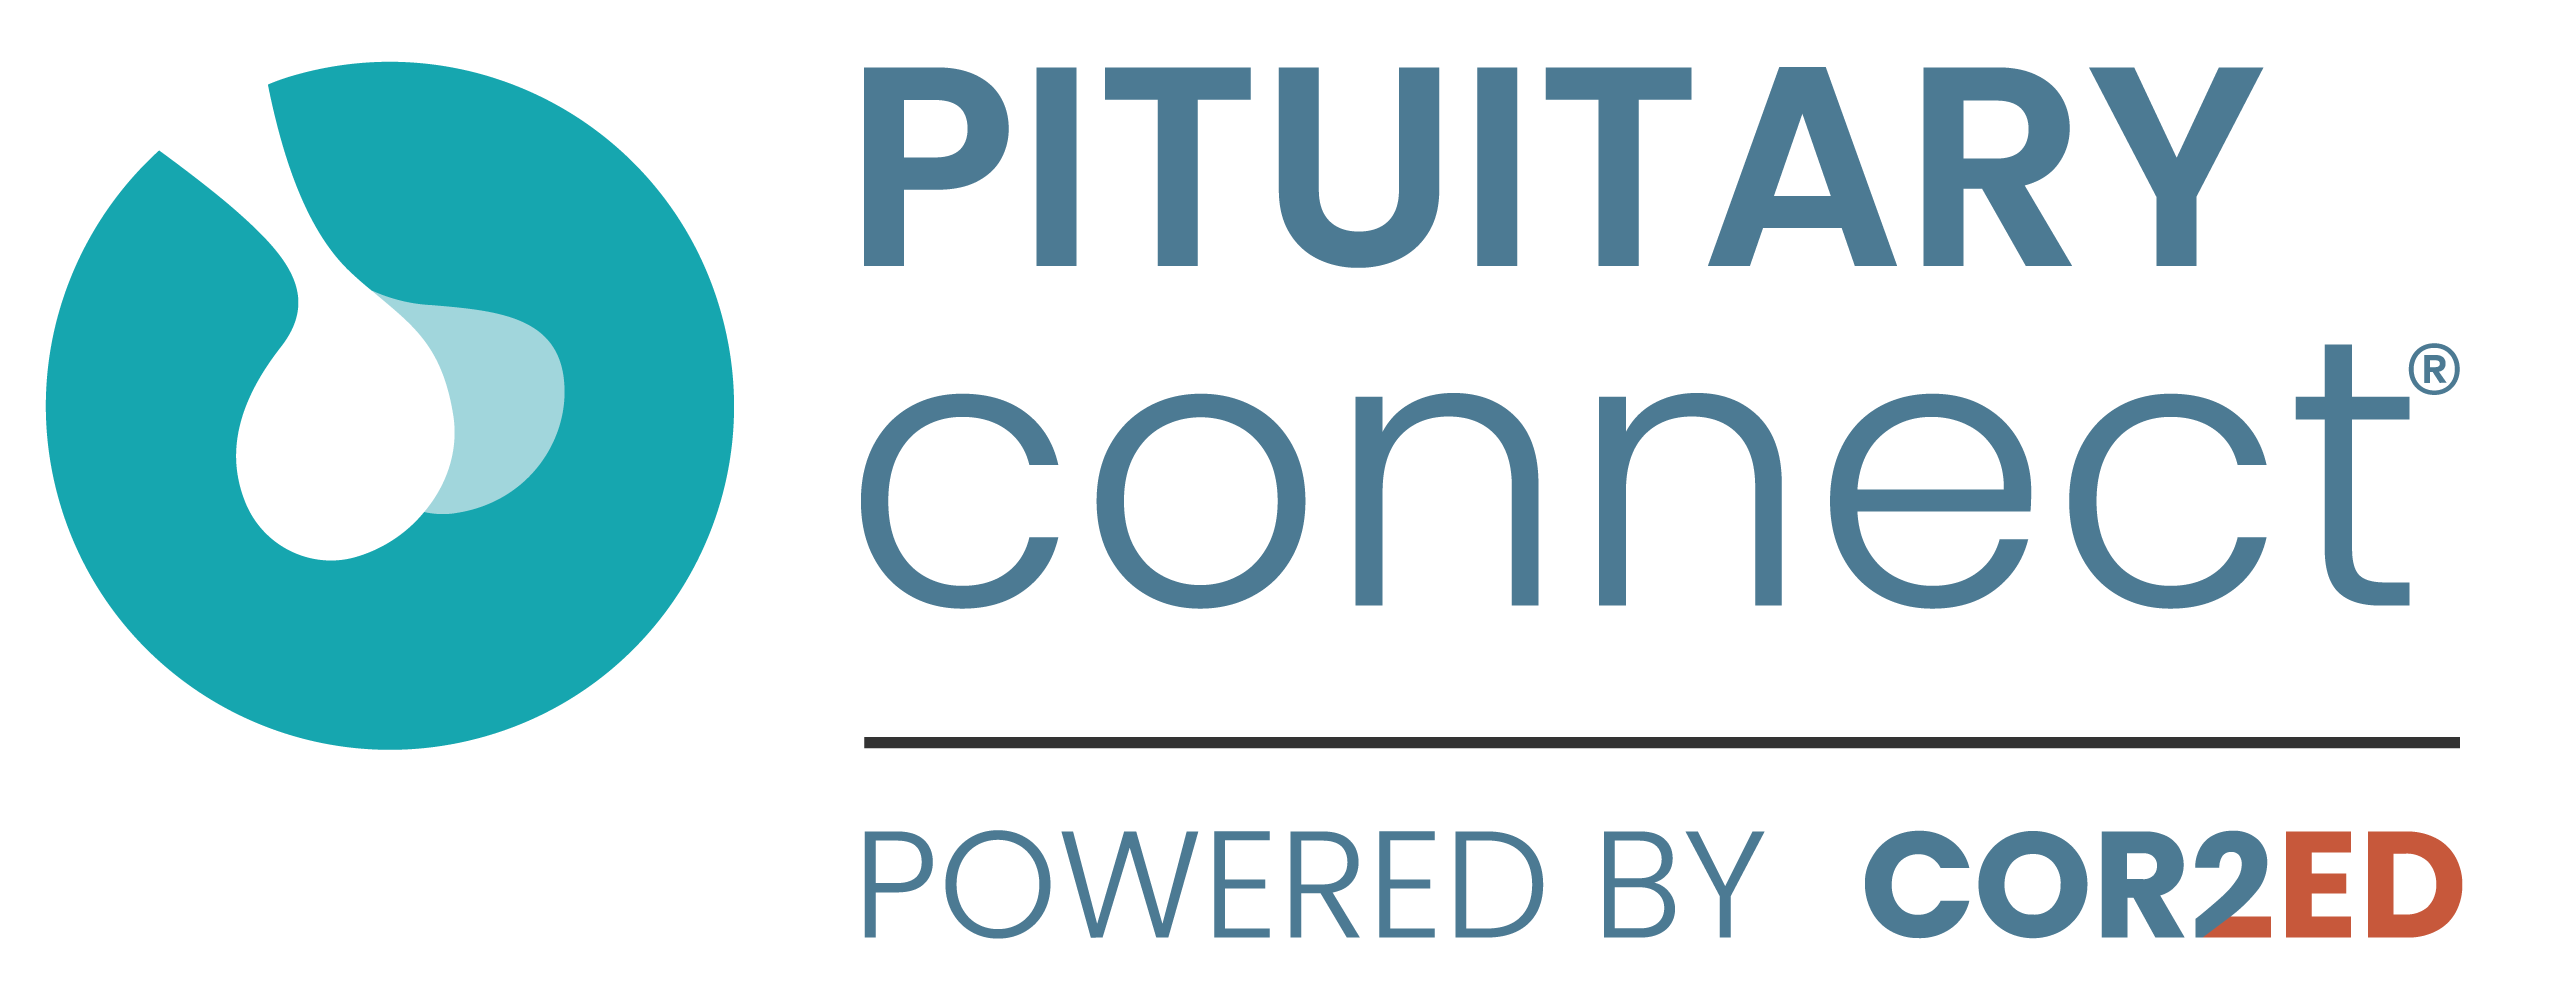 pituitary-connect-logo